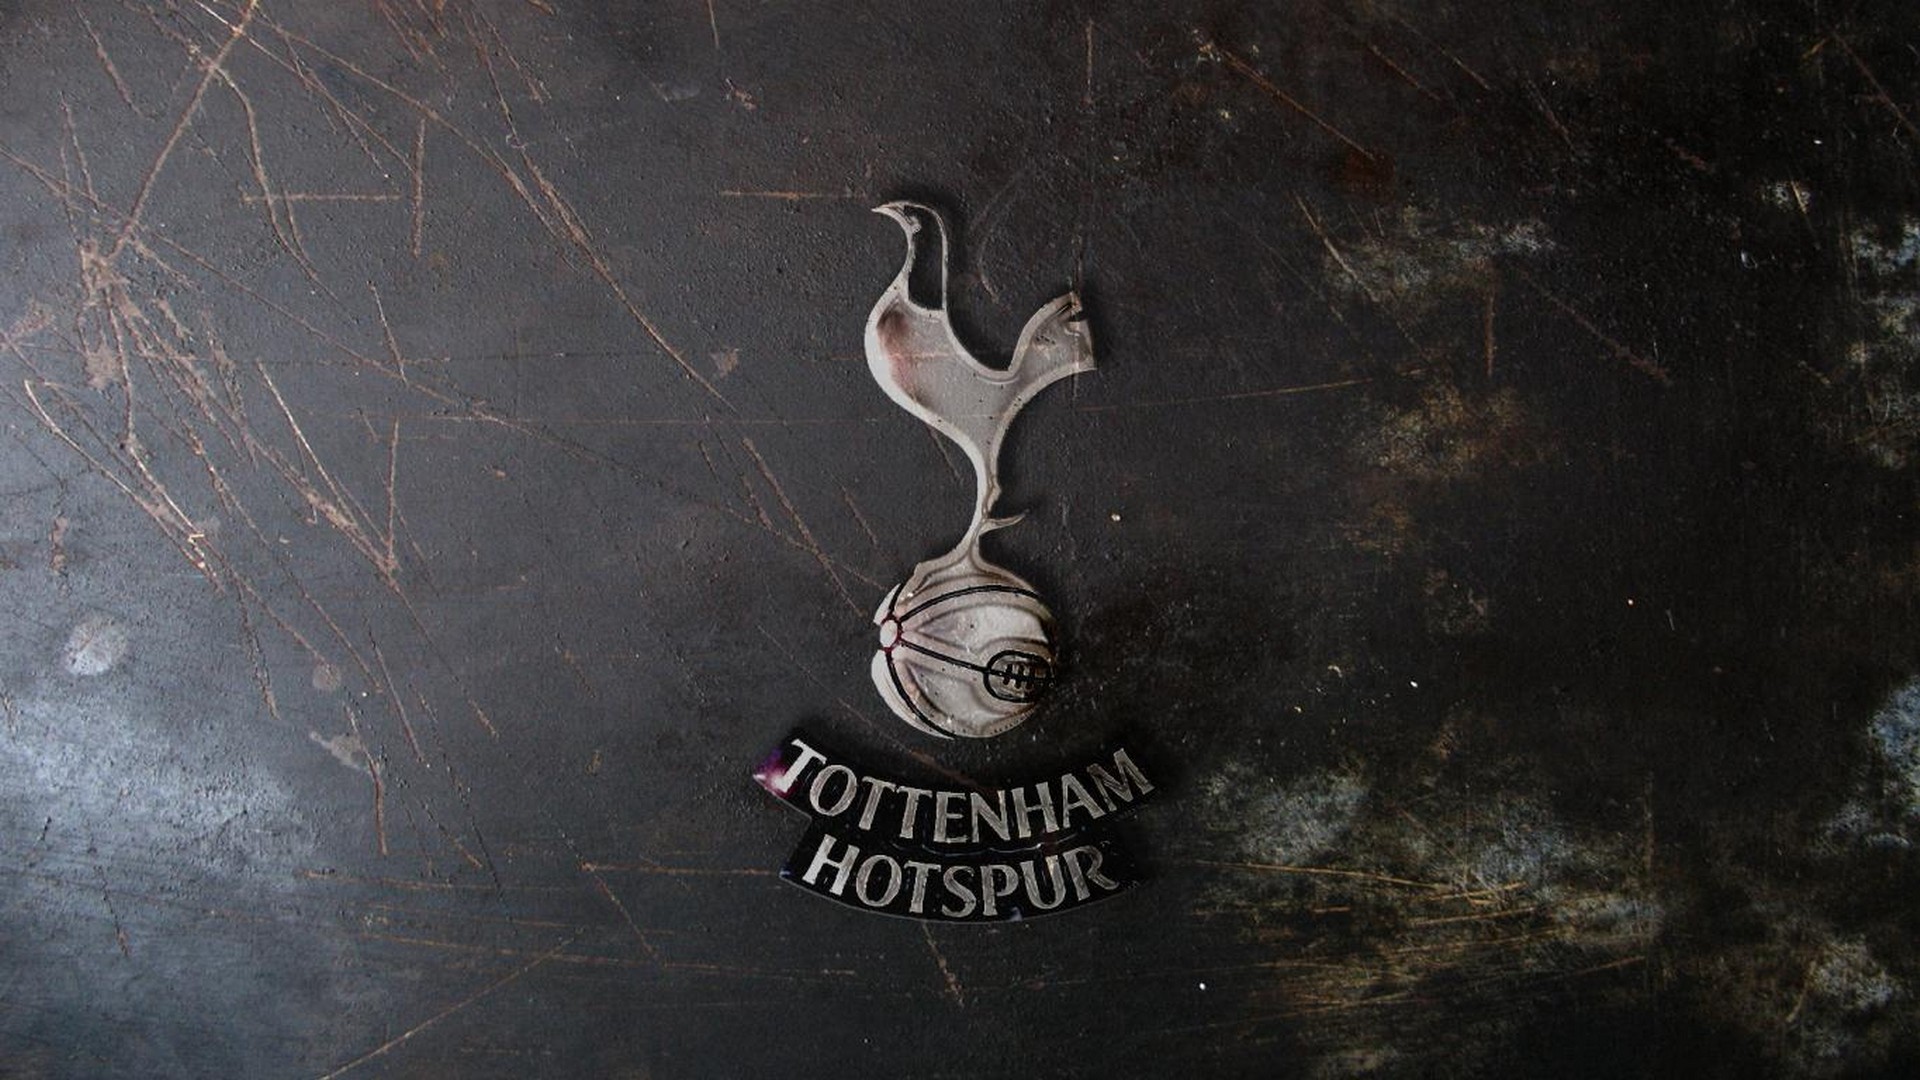 Tottenham Hotspur Wallpaper HD with high-resolution 1920x1080 pixel. You can use this wallpaper for your Desktop Computers, Mac Screensavers, Windows Backgrounds, iPhone Wallpapers, Tablet or Android Lock screen and another Mobile device